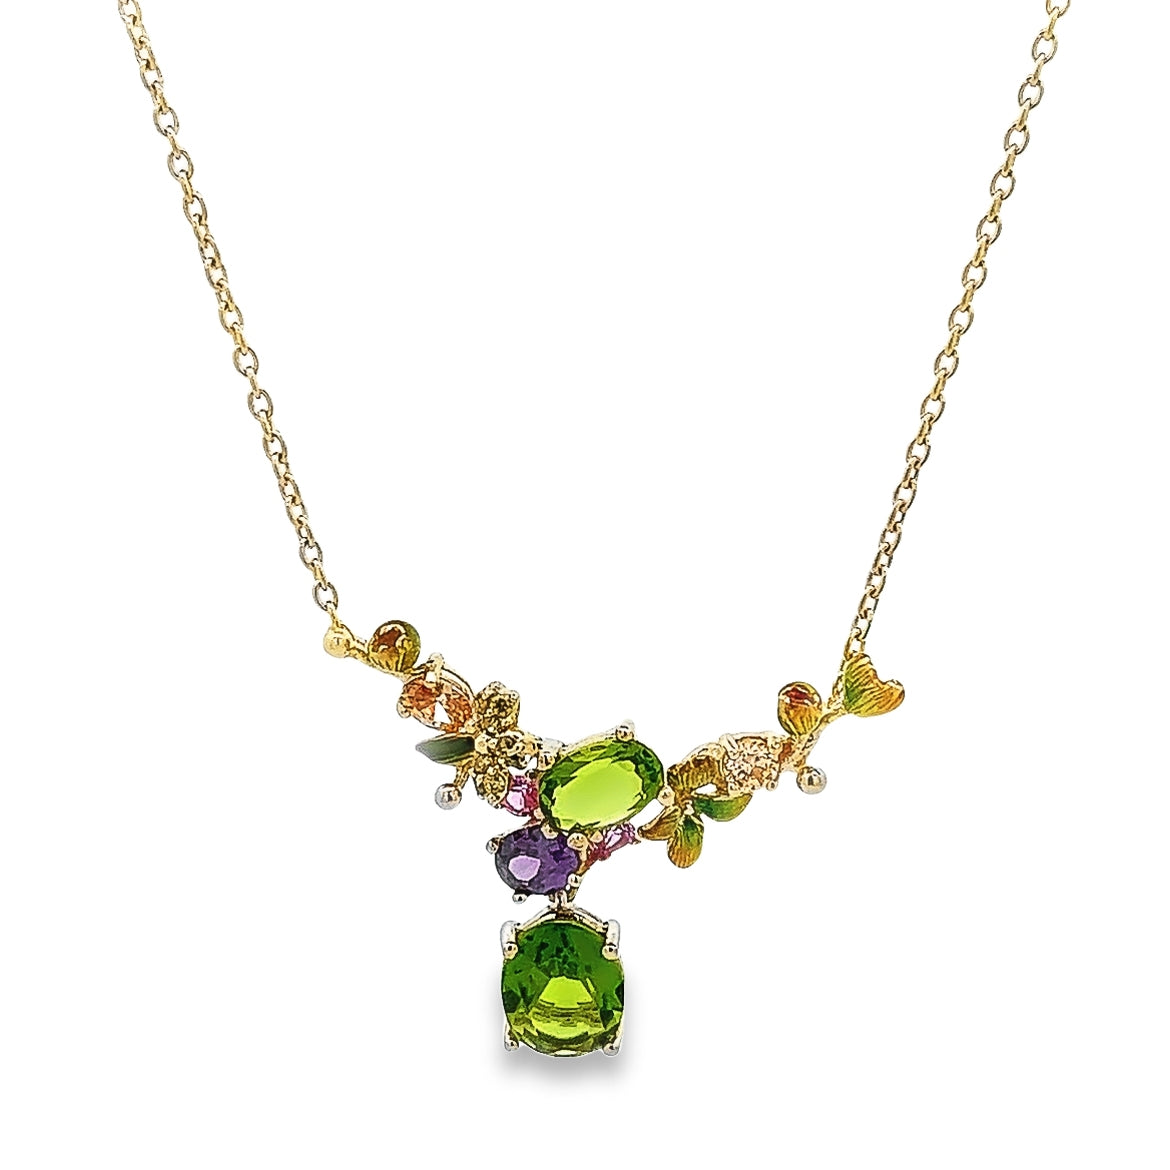 925 SILVER GOLD PLATED WITH PERIDOT AND AMETHYST CRYSTALS NECKLACE